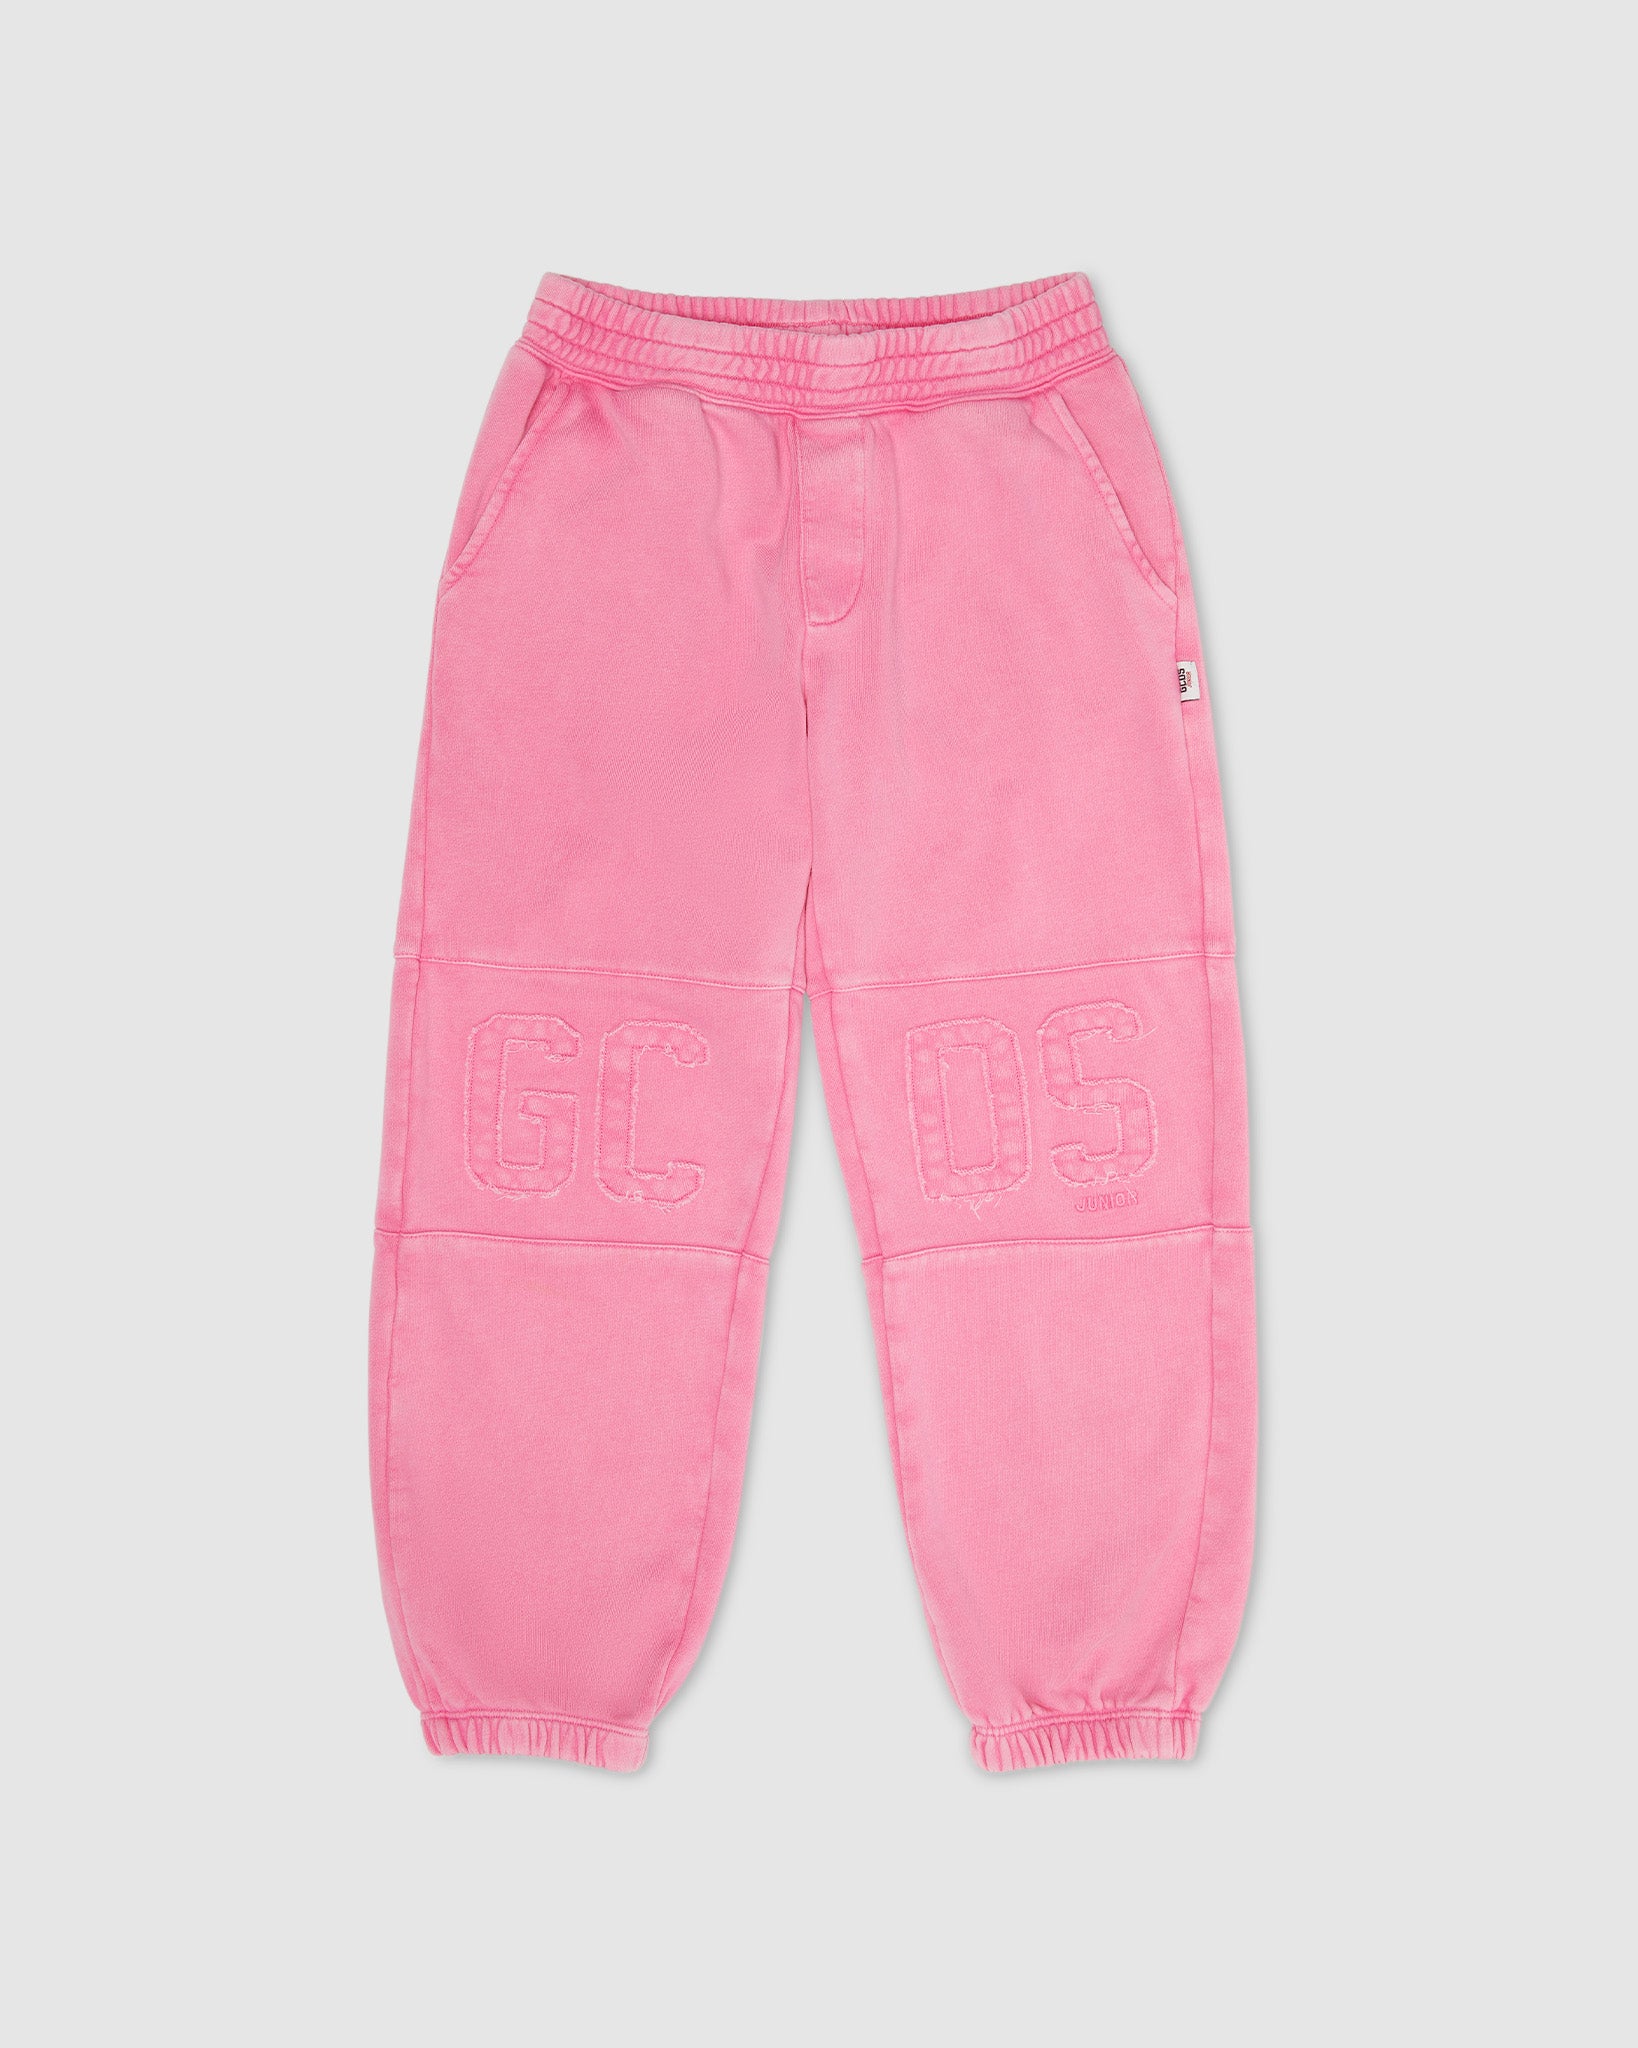 Overdyed Gcds Logo band sweatbottoms: Unisex Trousers Cradle Pink